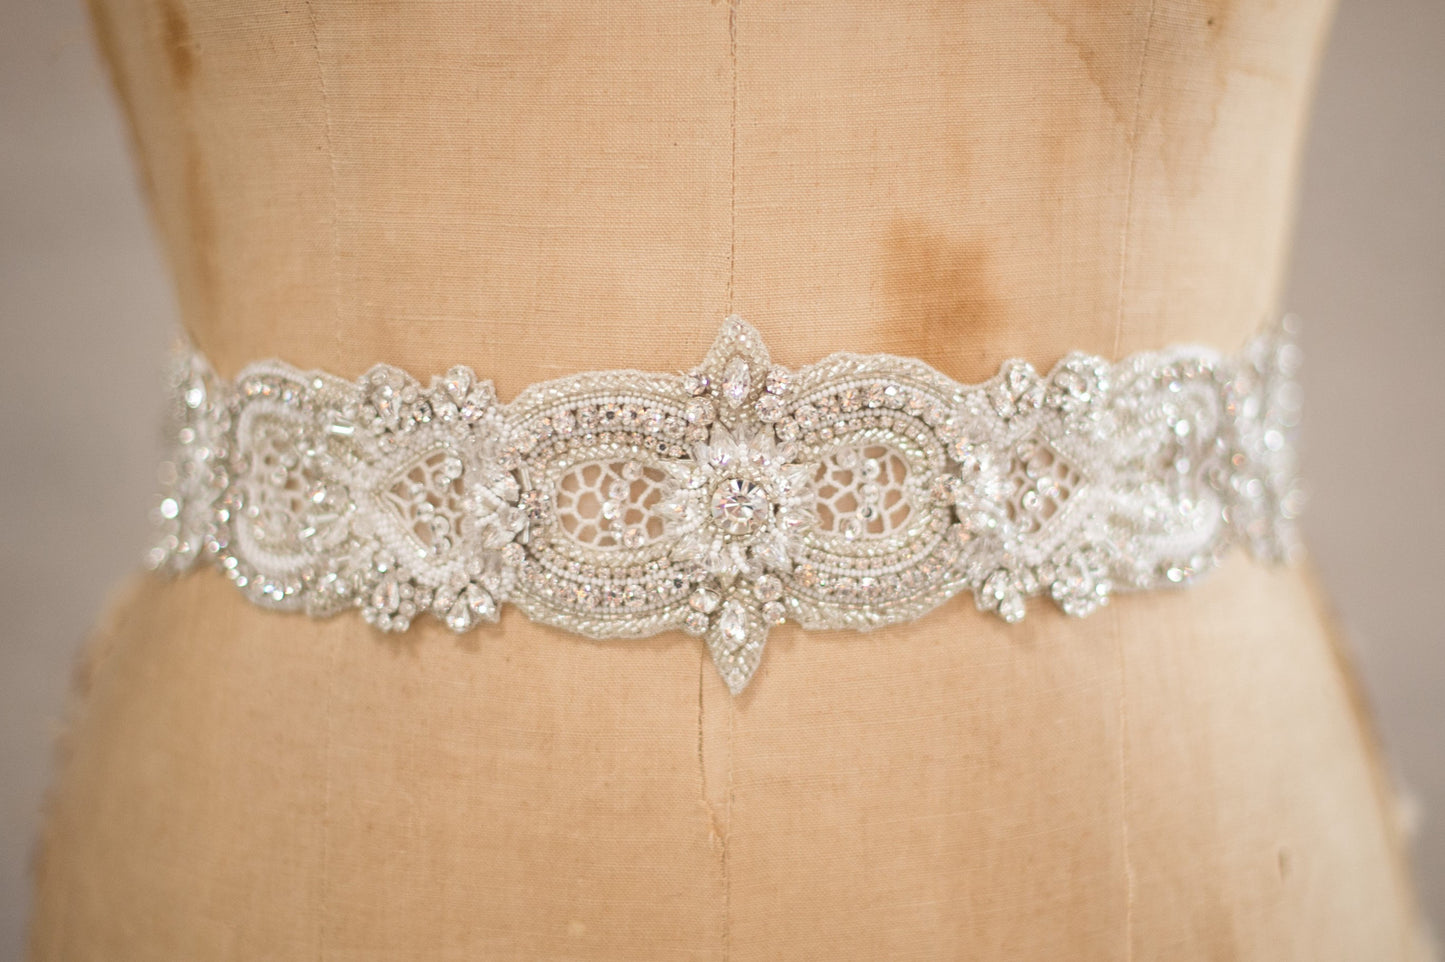 Bridal Accessories and Wedding Jewelry, Camilla Christine, Allure Sash, Applique, Silver Ivory, Crochet Cutout Detail Crystal Beaded Tapered Width Long Sash